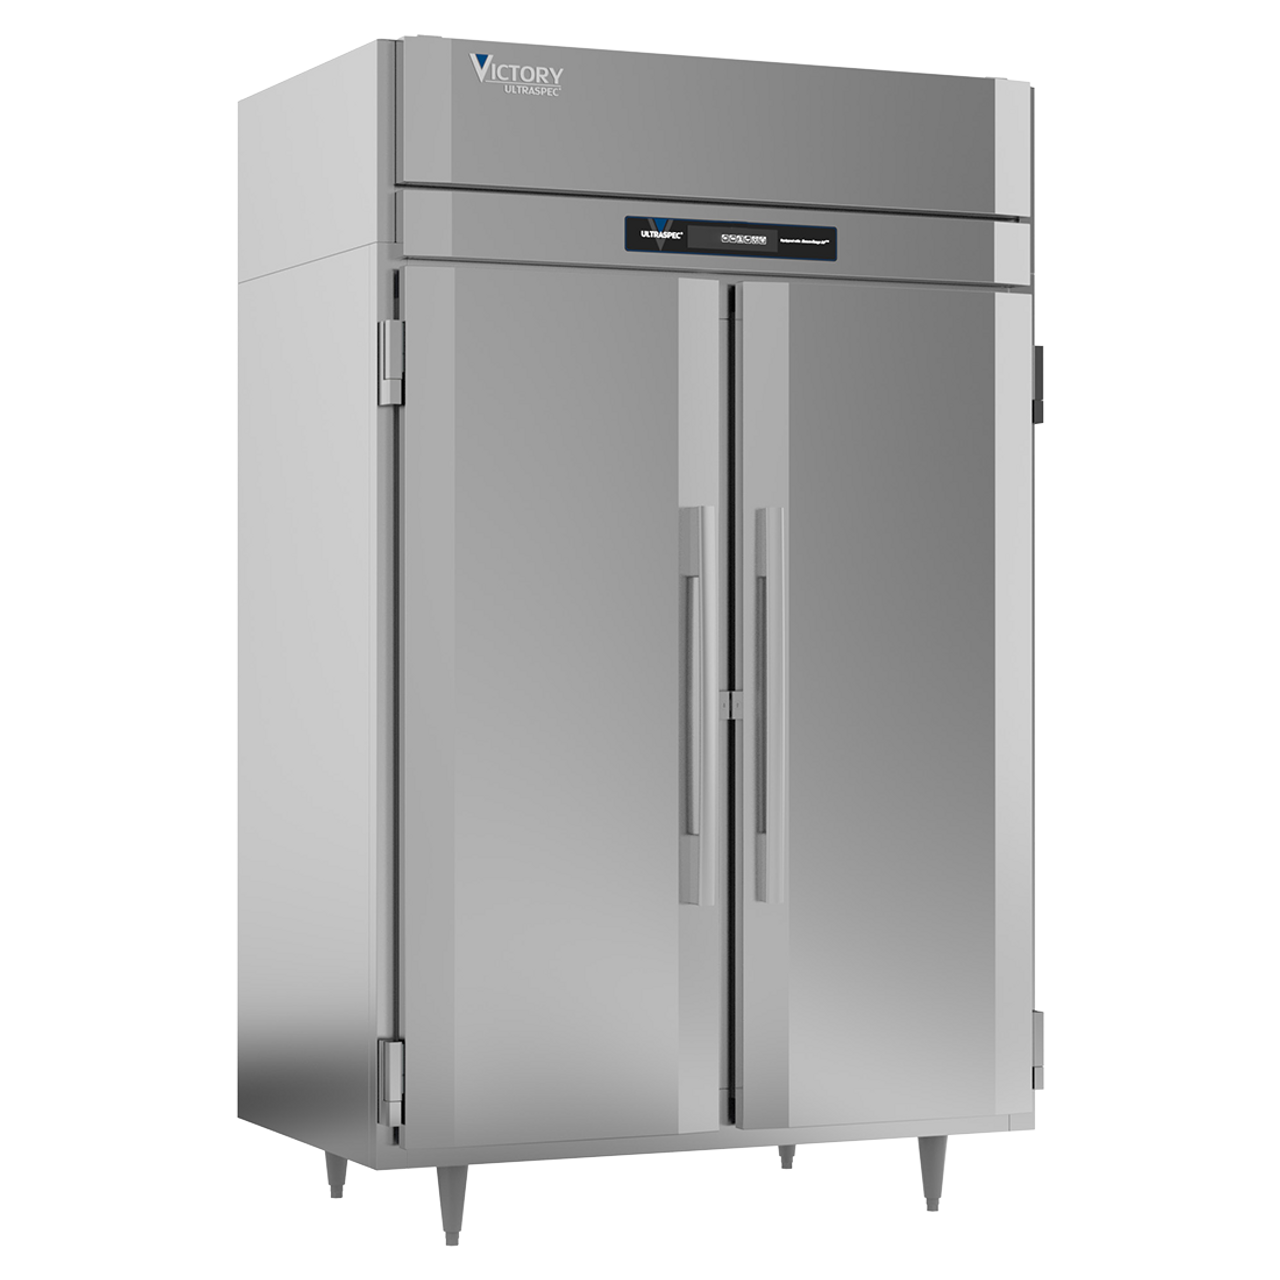 UltraSpec™ Series Freezer, Reach-in, two-section, self-contained refrigeration, 44.57 cu. ft. capacity, (2) full height solid hinged doors, (6) silver freeze (chrome-style) shelves, stainless exterior & aluminum interior, standard depth cabinet, TOUCH POINT™ electronic temperature control/indicator, LED lighting, expansion valve technology, Santoprene door gaskets with 2 year warranty, stainless steel breakers, R290 Hydrocarbon refrigerant, 3/4 HP, cULus, UL EPH Classified, UL-Sanitation, MADE IN USA